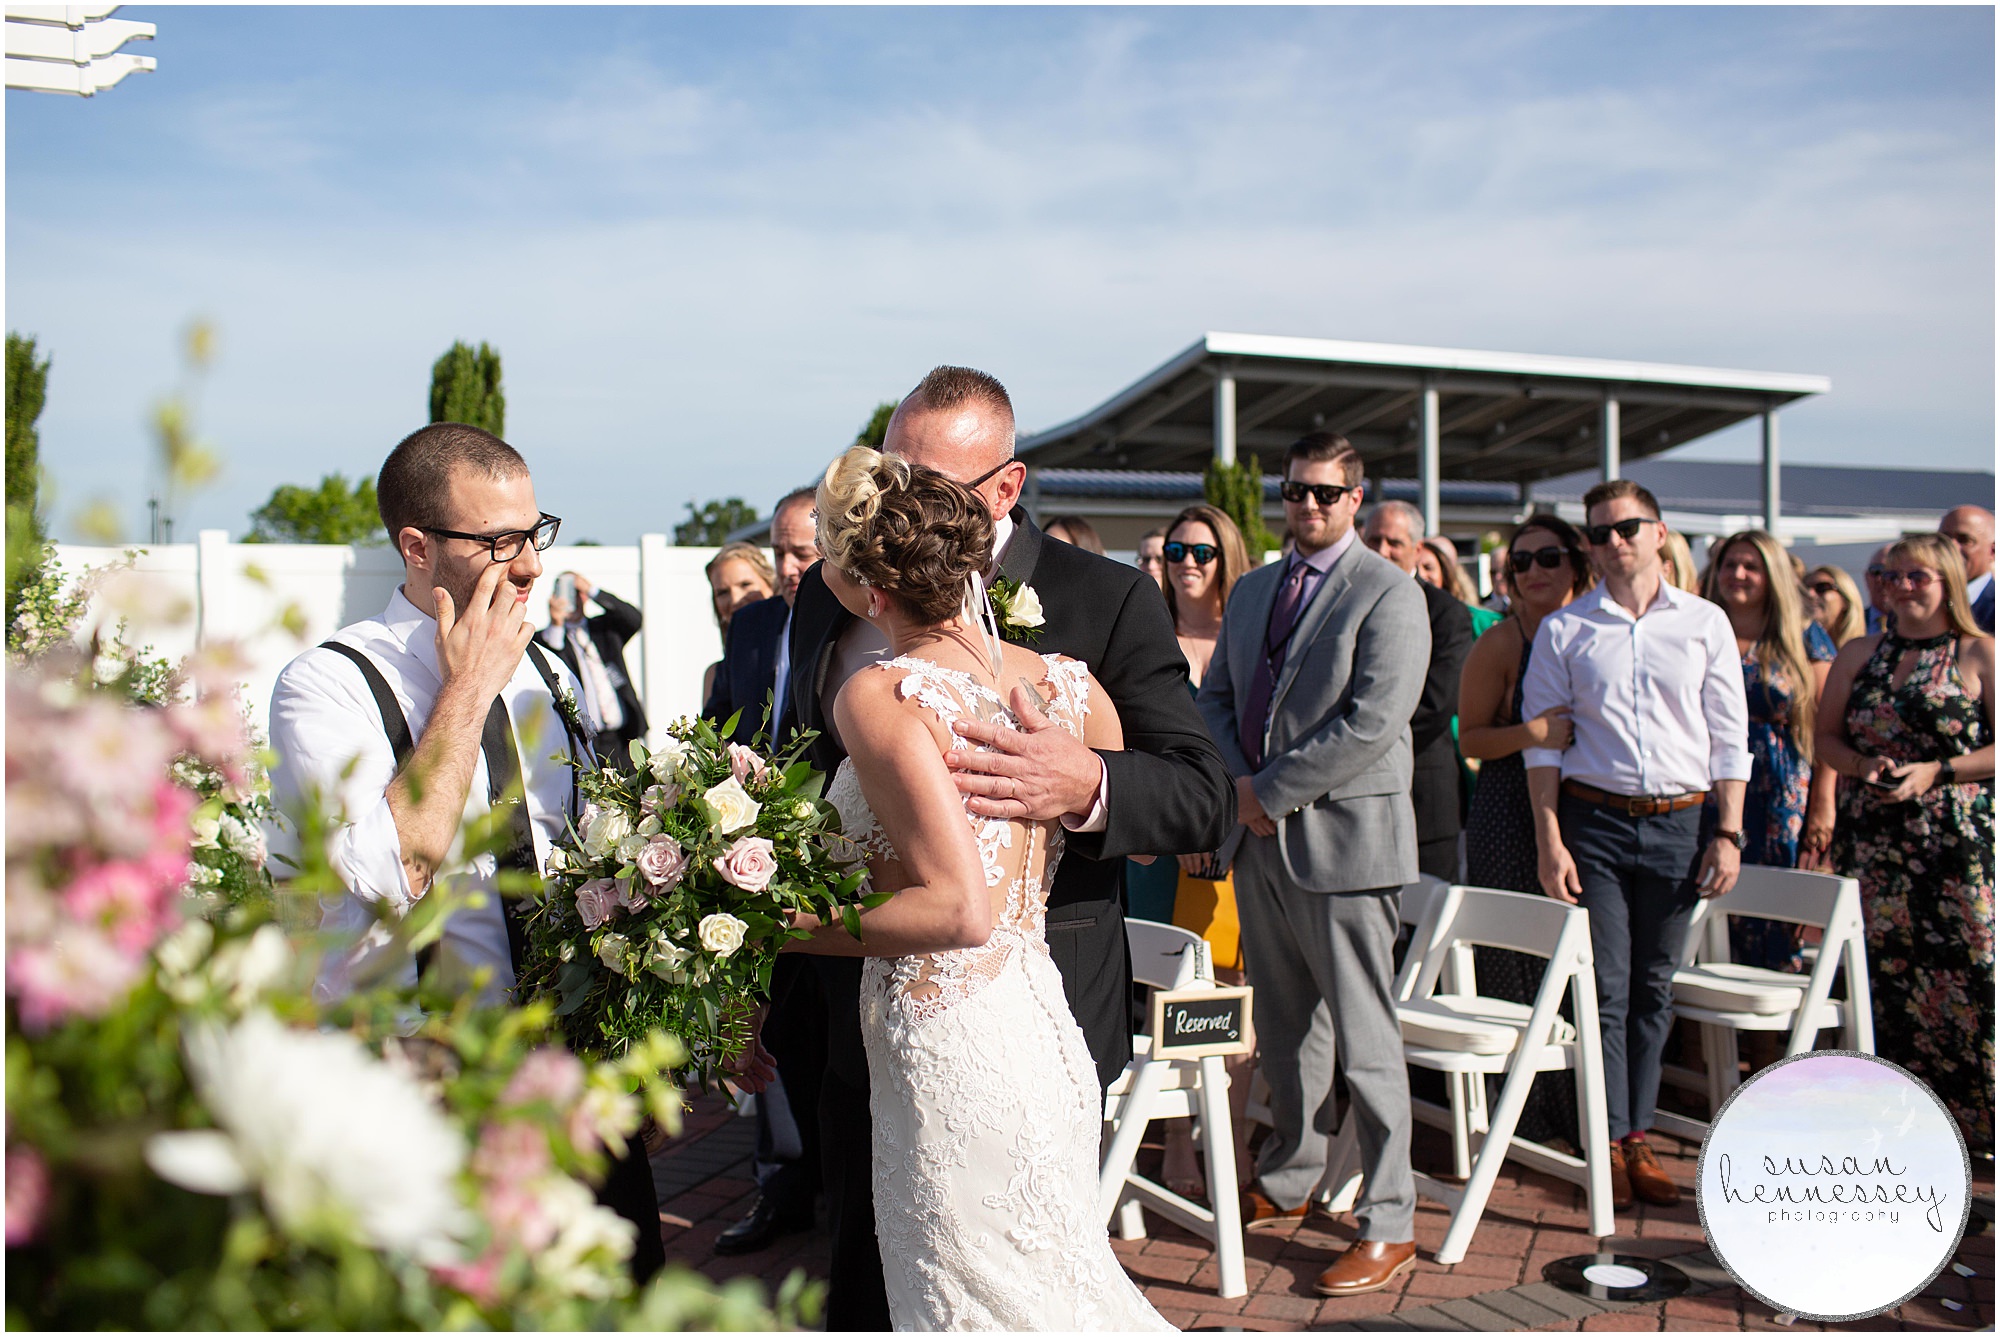 father of bride kissing daughter on cheek